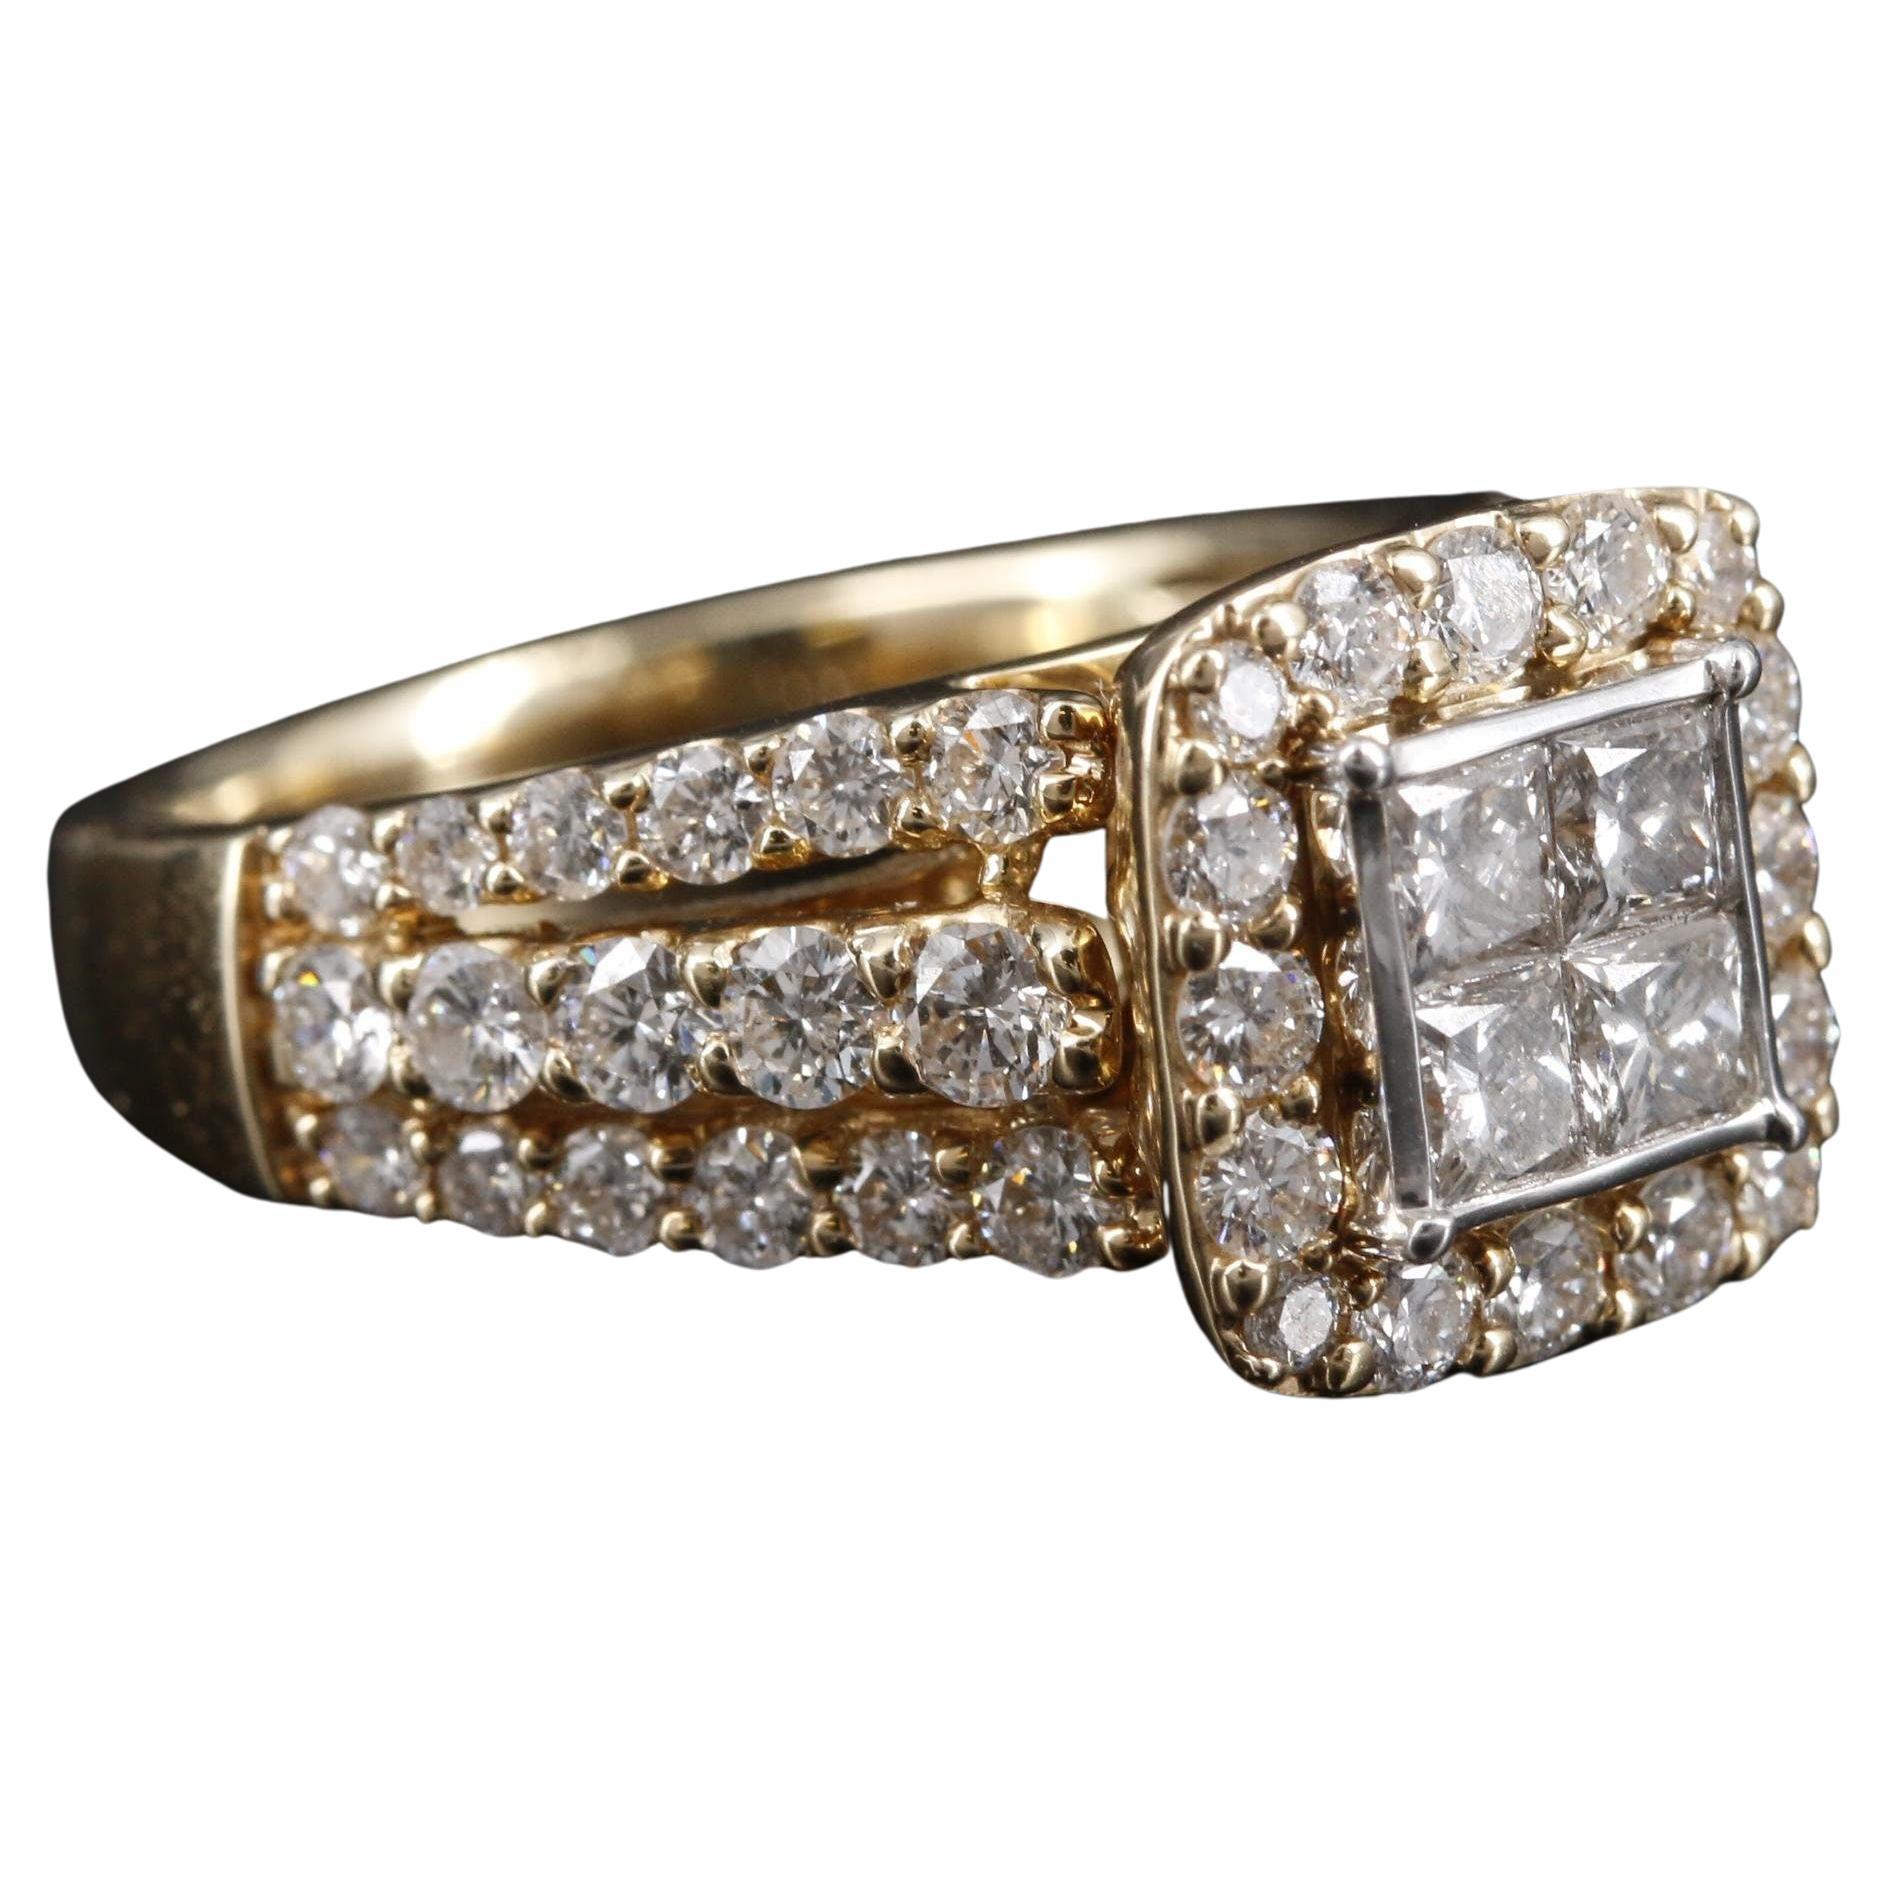 For Sale:  Art Deco Certified 2 Carat Natural Diamond Engagement Ring in 18K Gold For Men's